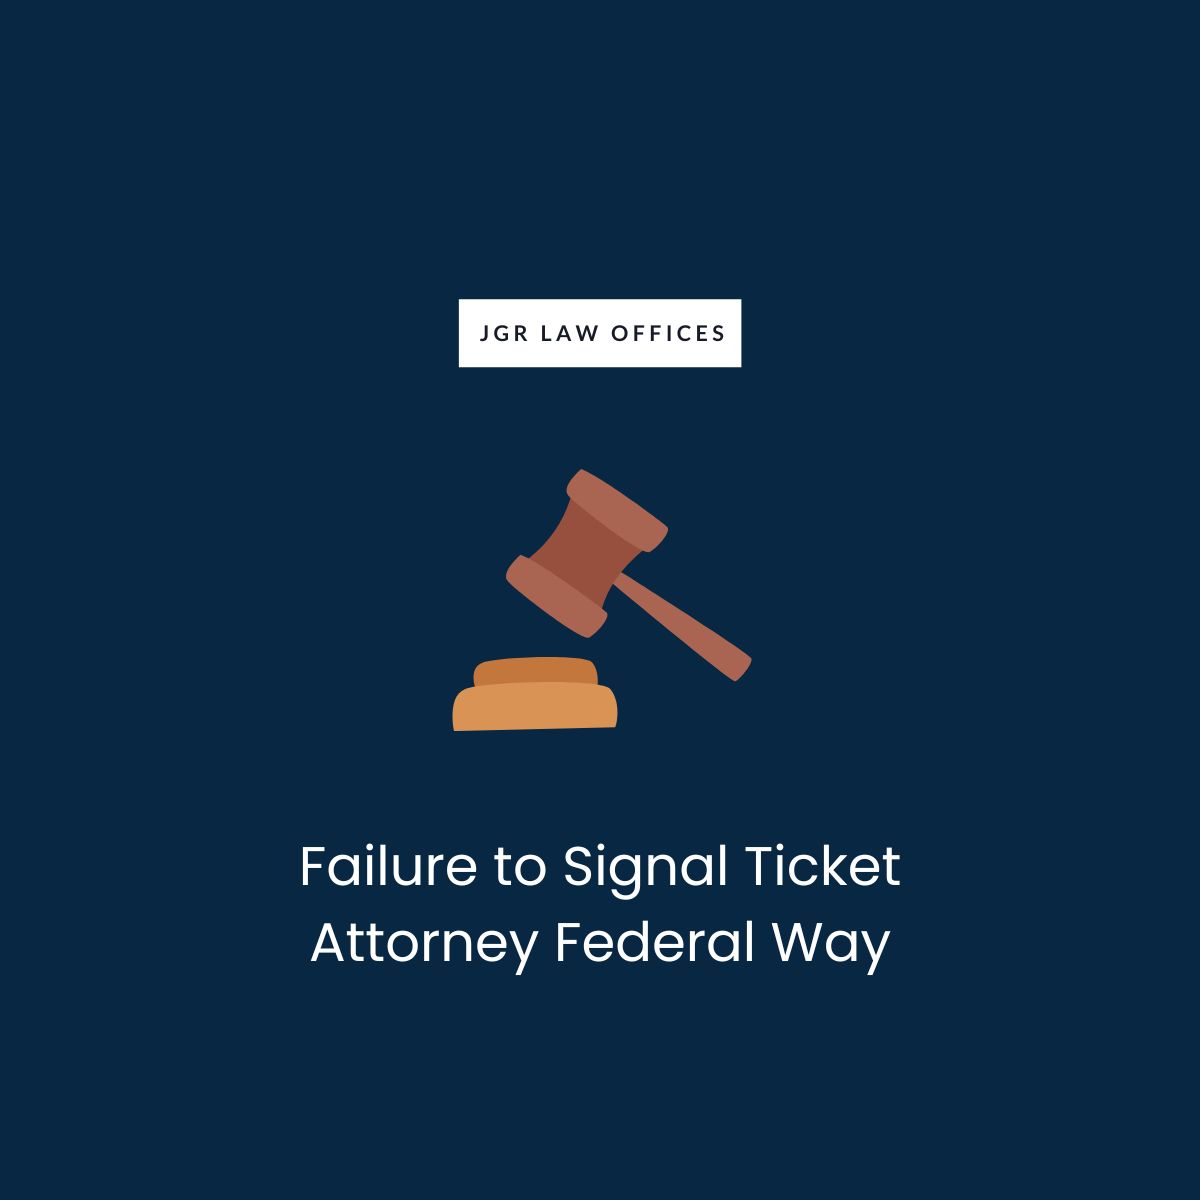 Failure to Signal Ticket Attorney Federal Way